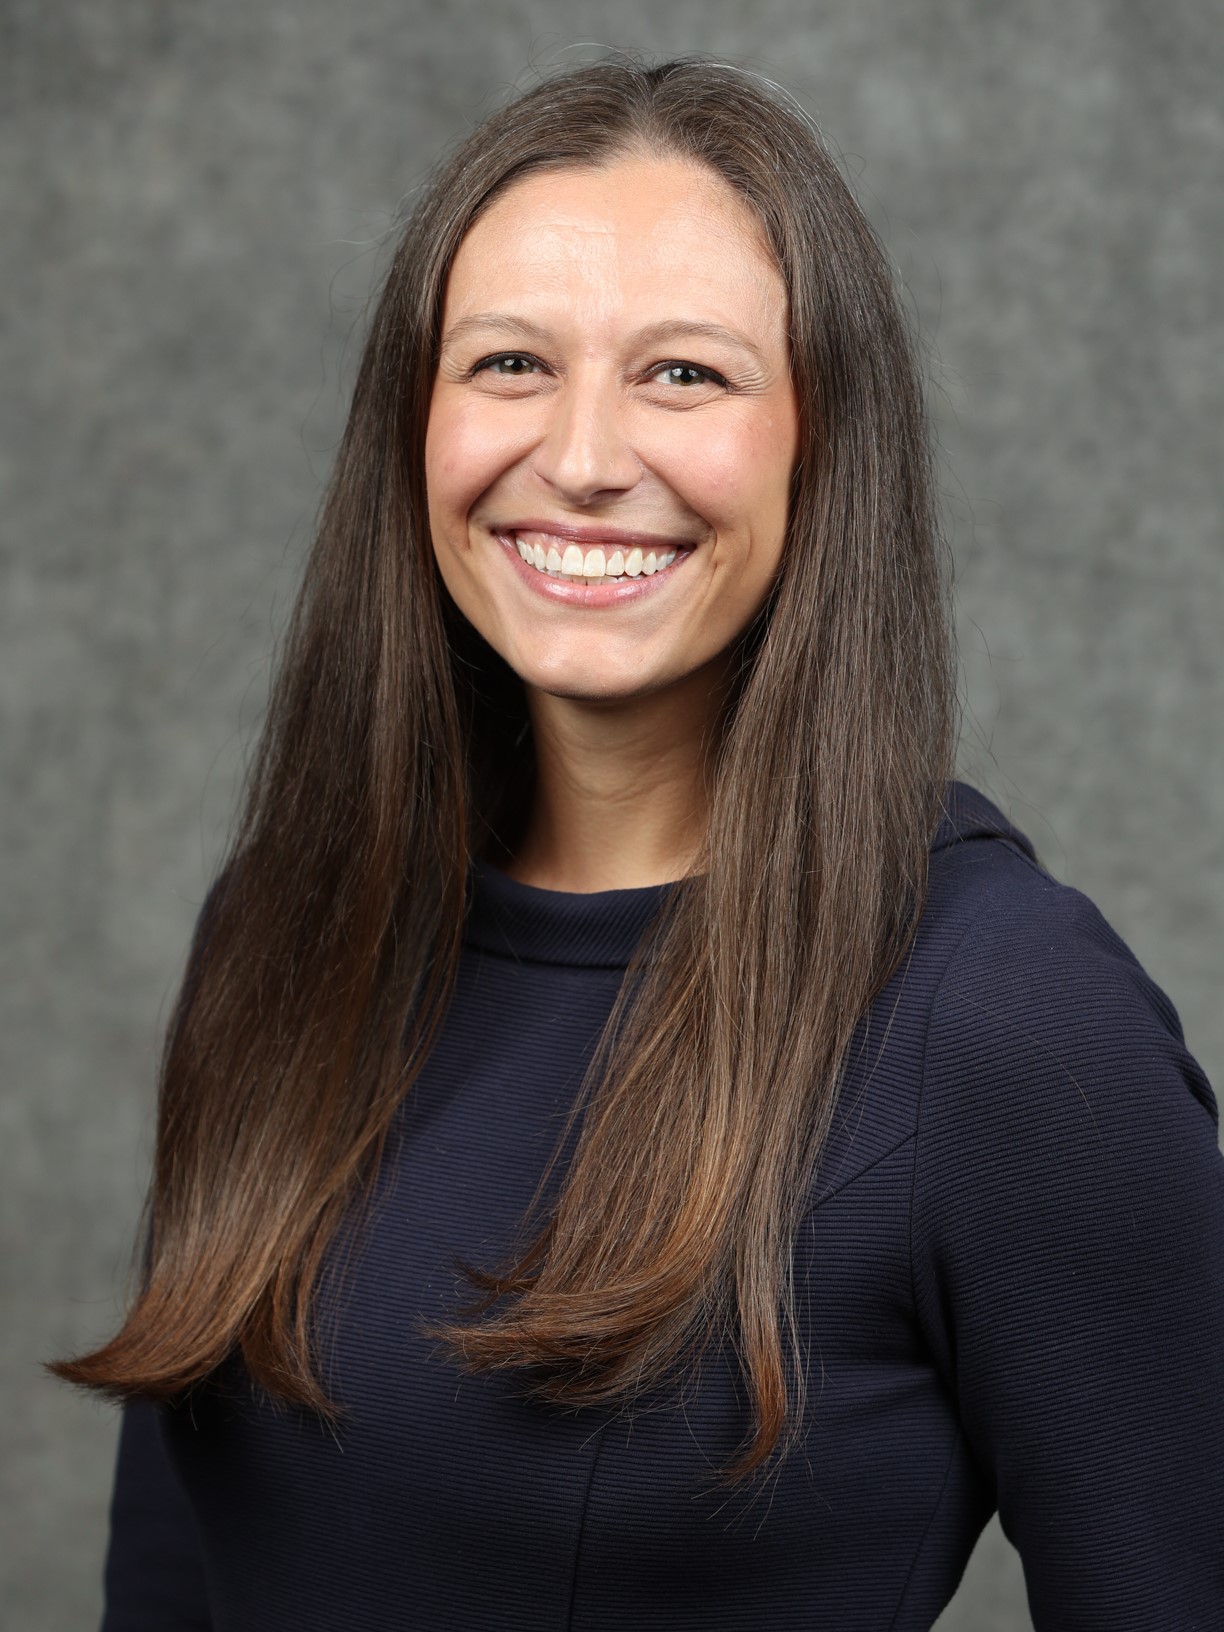 Profile Picture of Jaclyn Cole, PharmD, BCPS, FFSHP